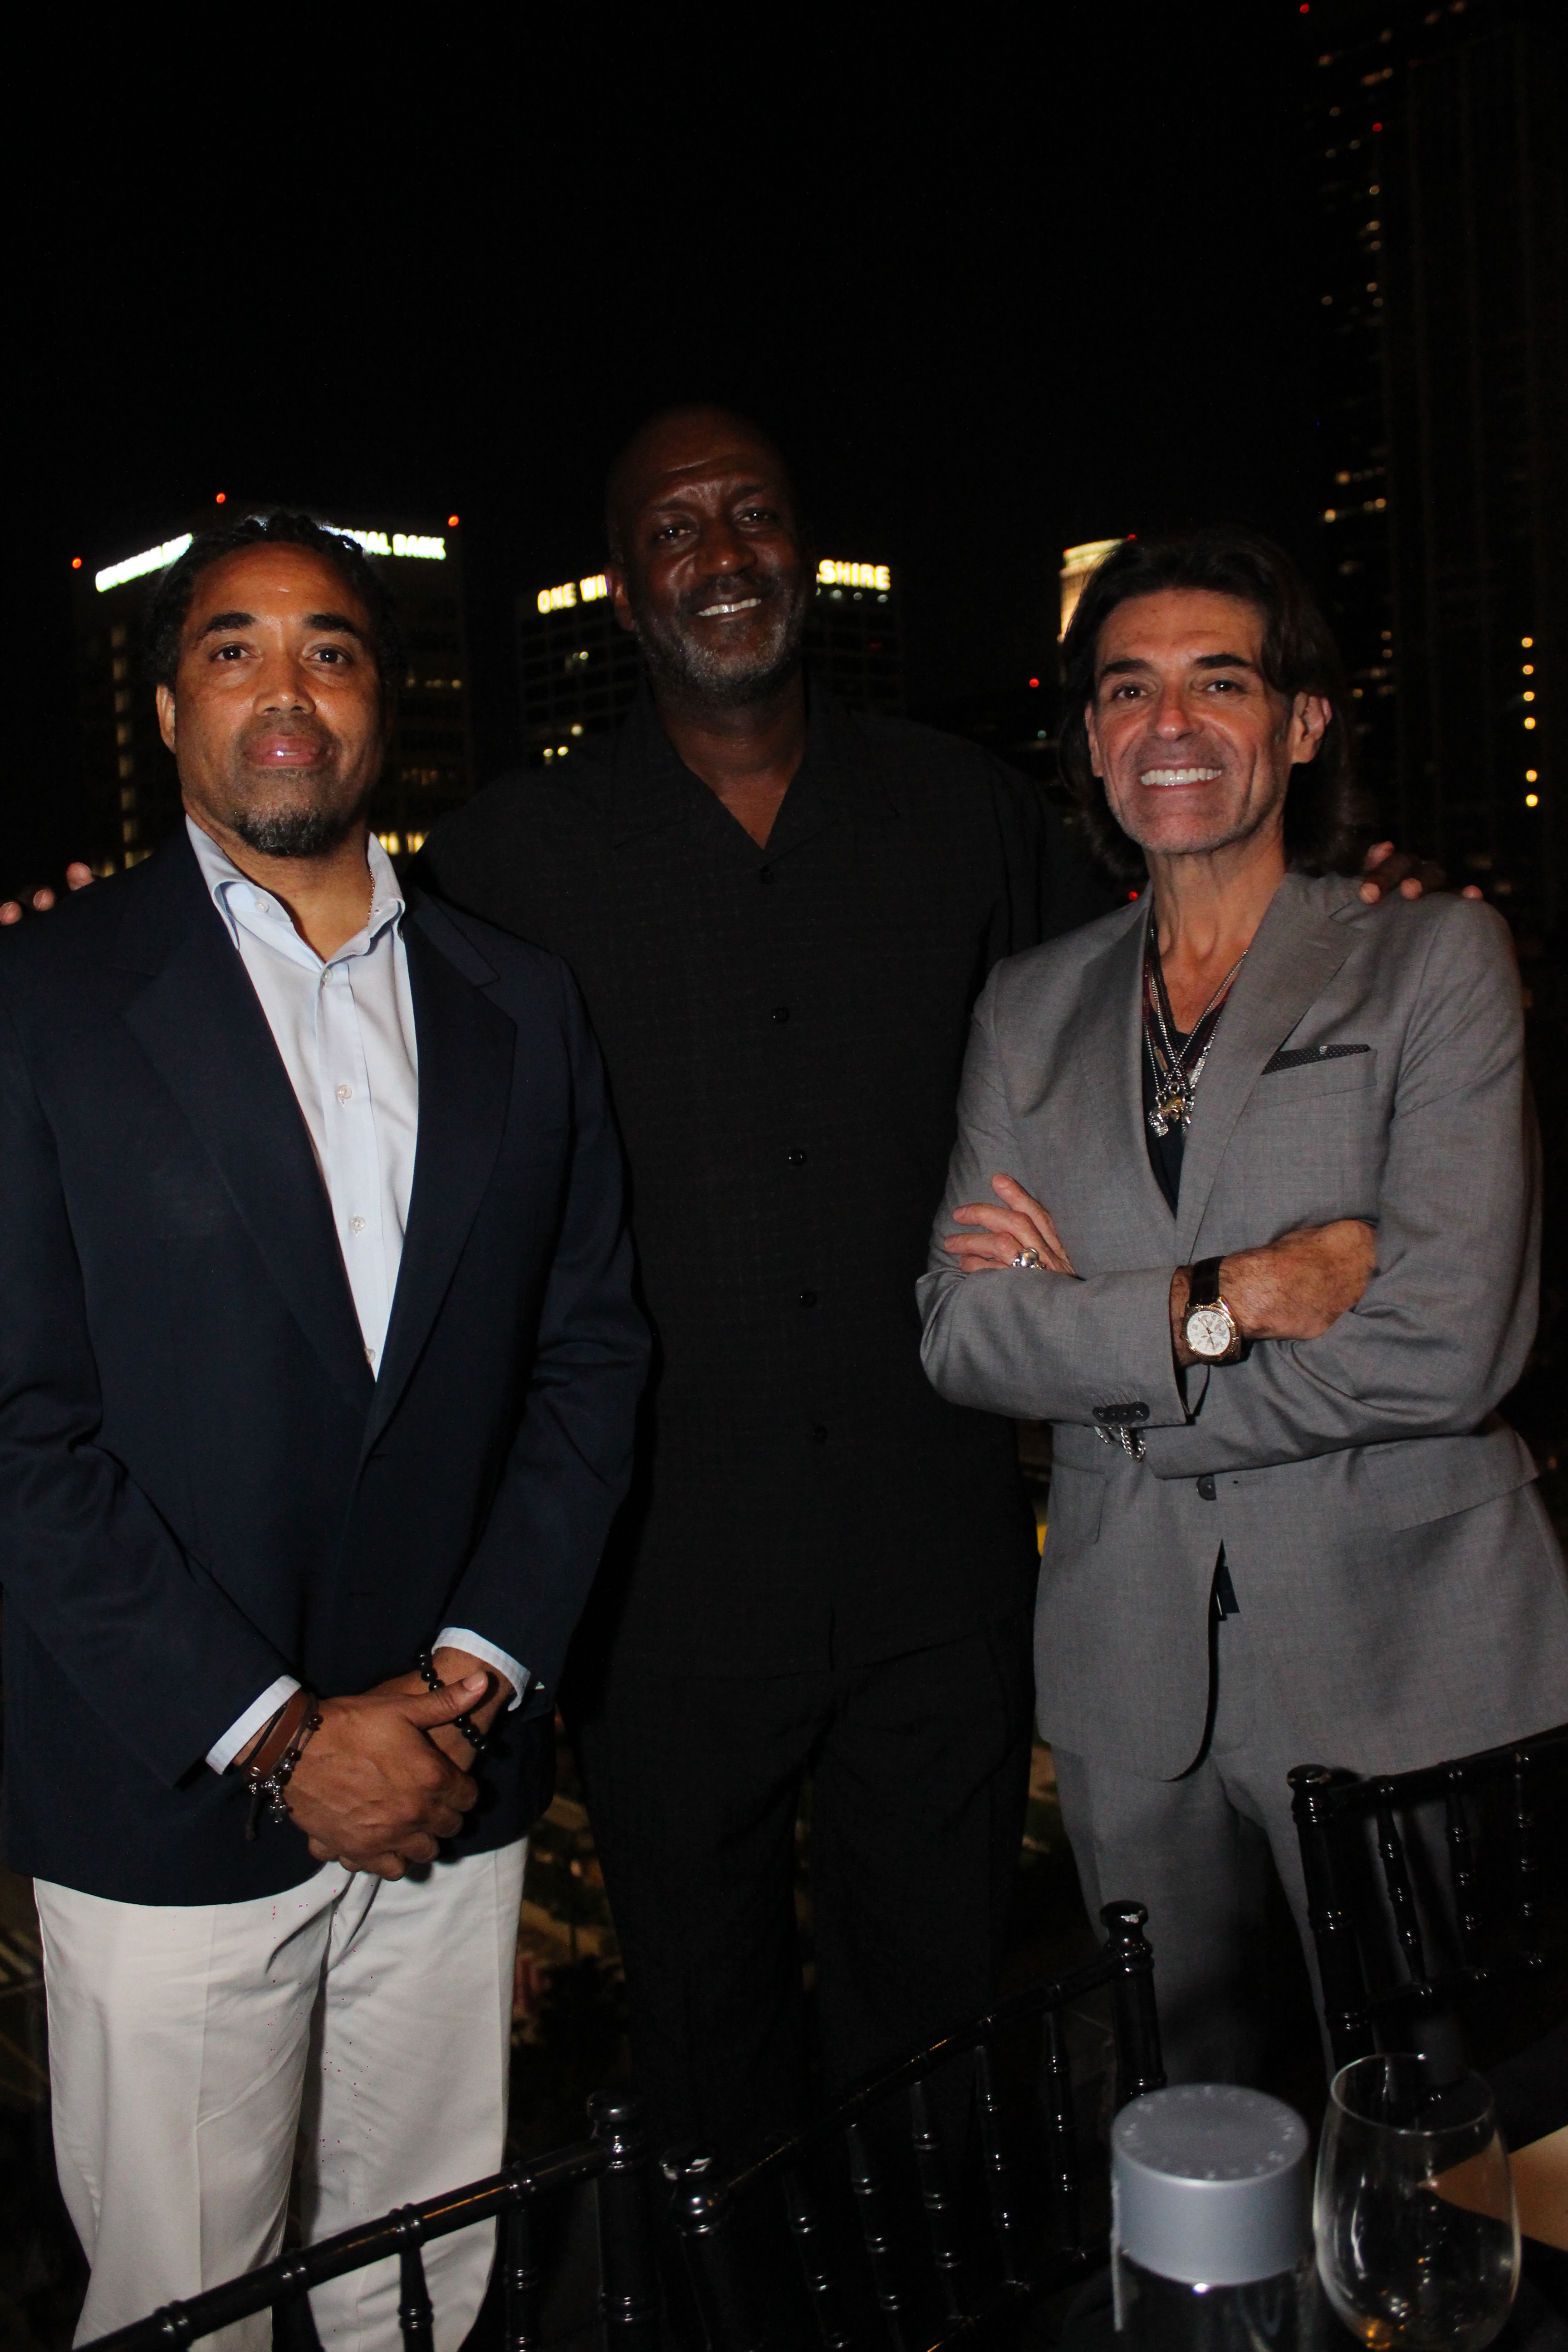 Herb G. Dogan, III., Nigel P. Miguel & Humberto Arechiga at the Belize Film Commission / ArDoMi MEDIA GROUP Dinner at Perch 4-21-2015